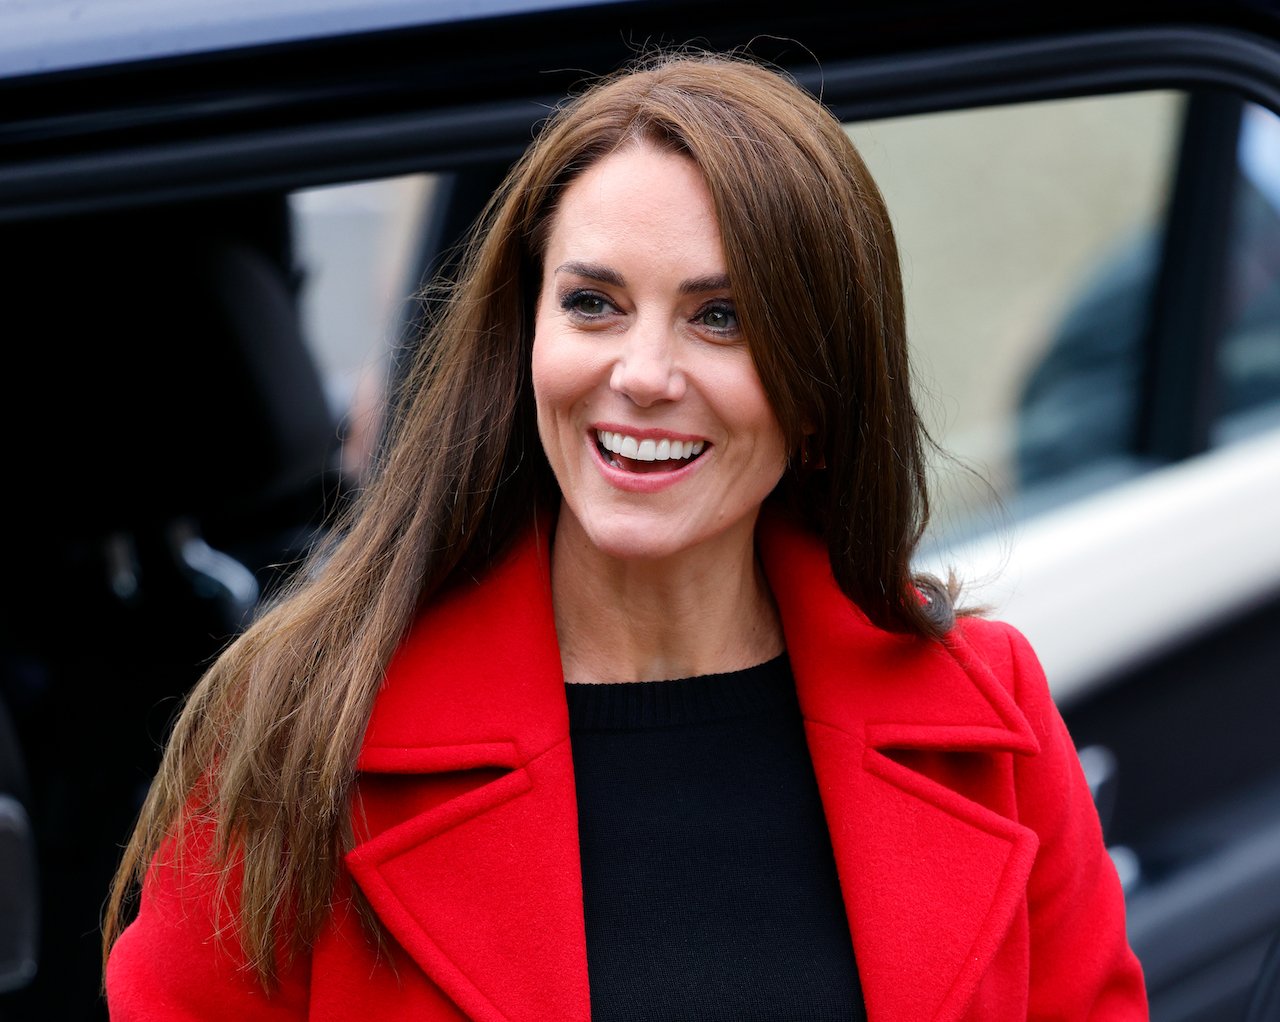 Kate Middleton visits Wales for the first time as the Princess of Wales in her "superhero color."